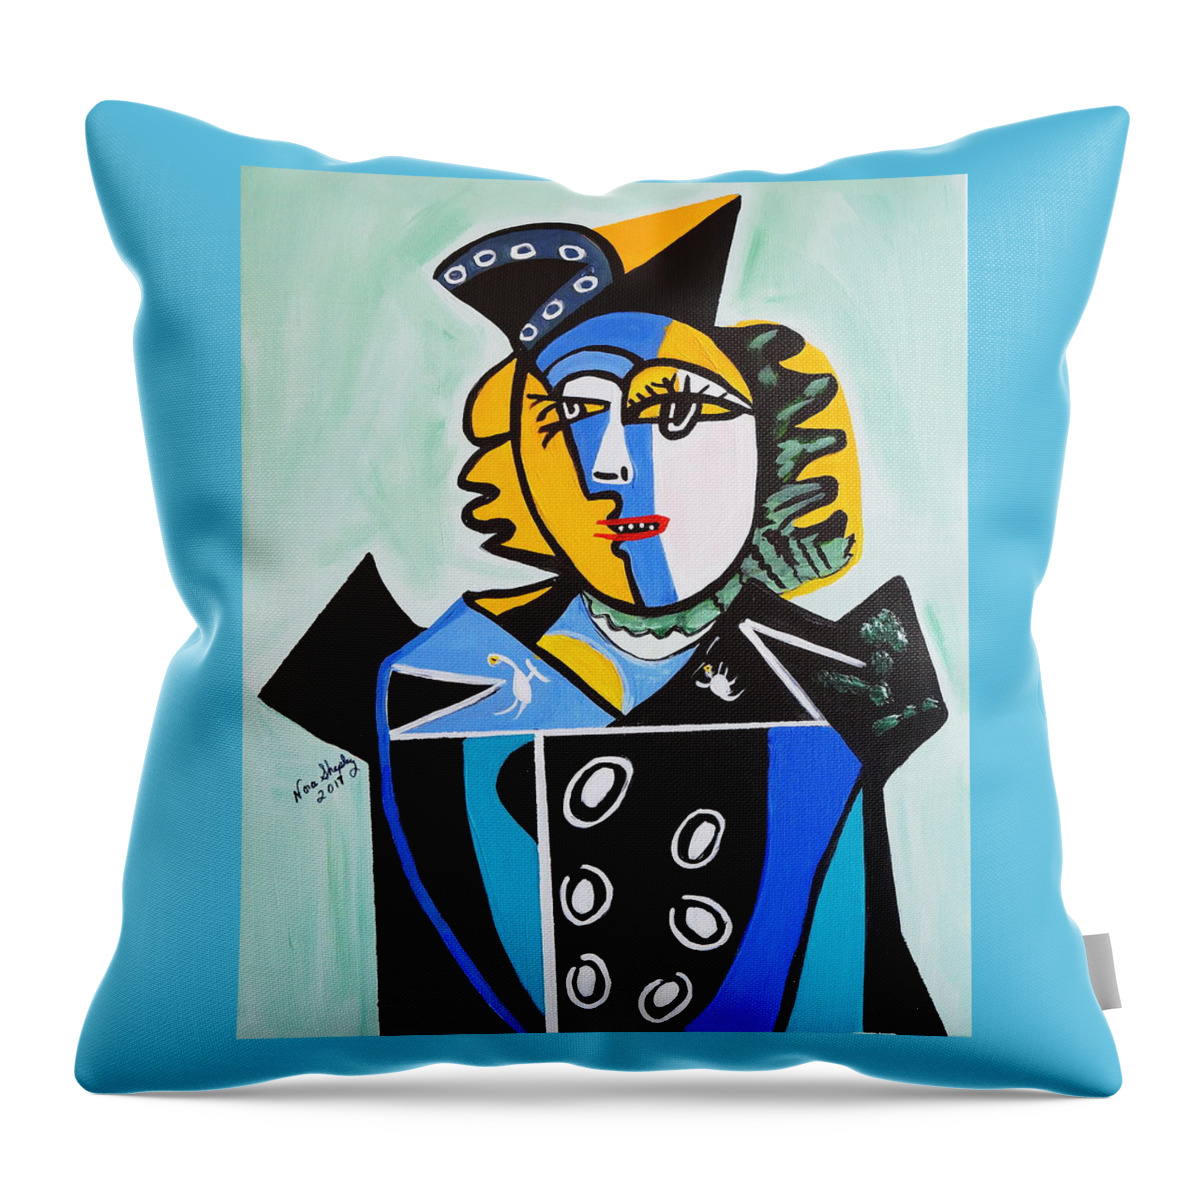 Picasso By Nora Throw Pillow featuring the painting Picasso By Nora The Queen by Nora Shepley